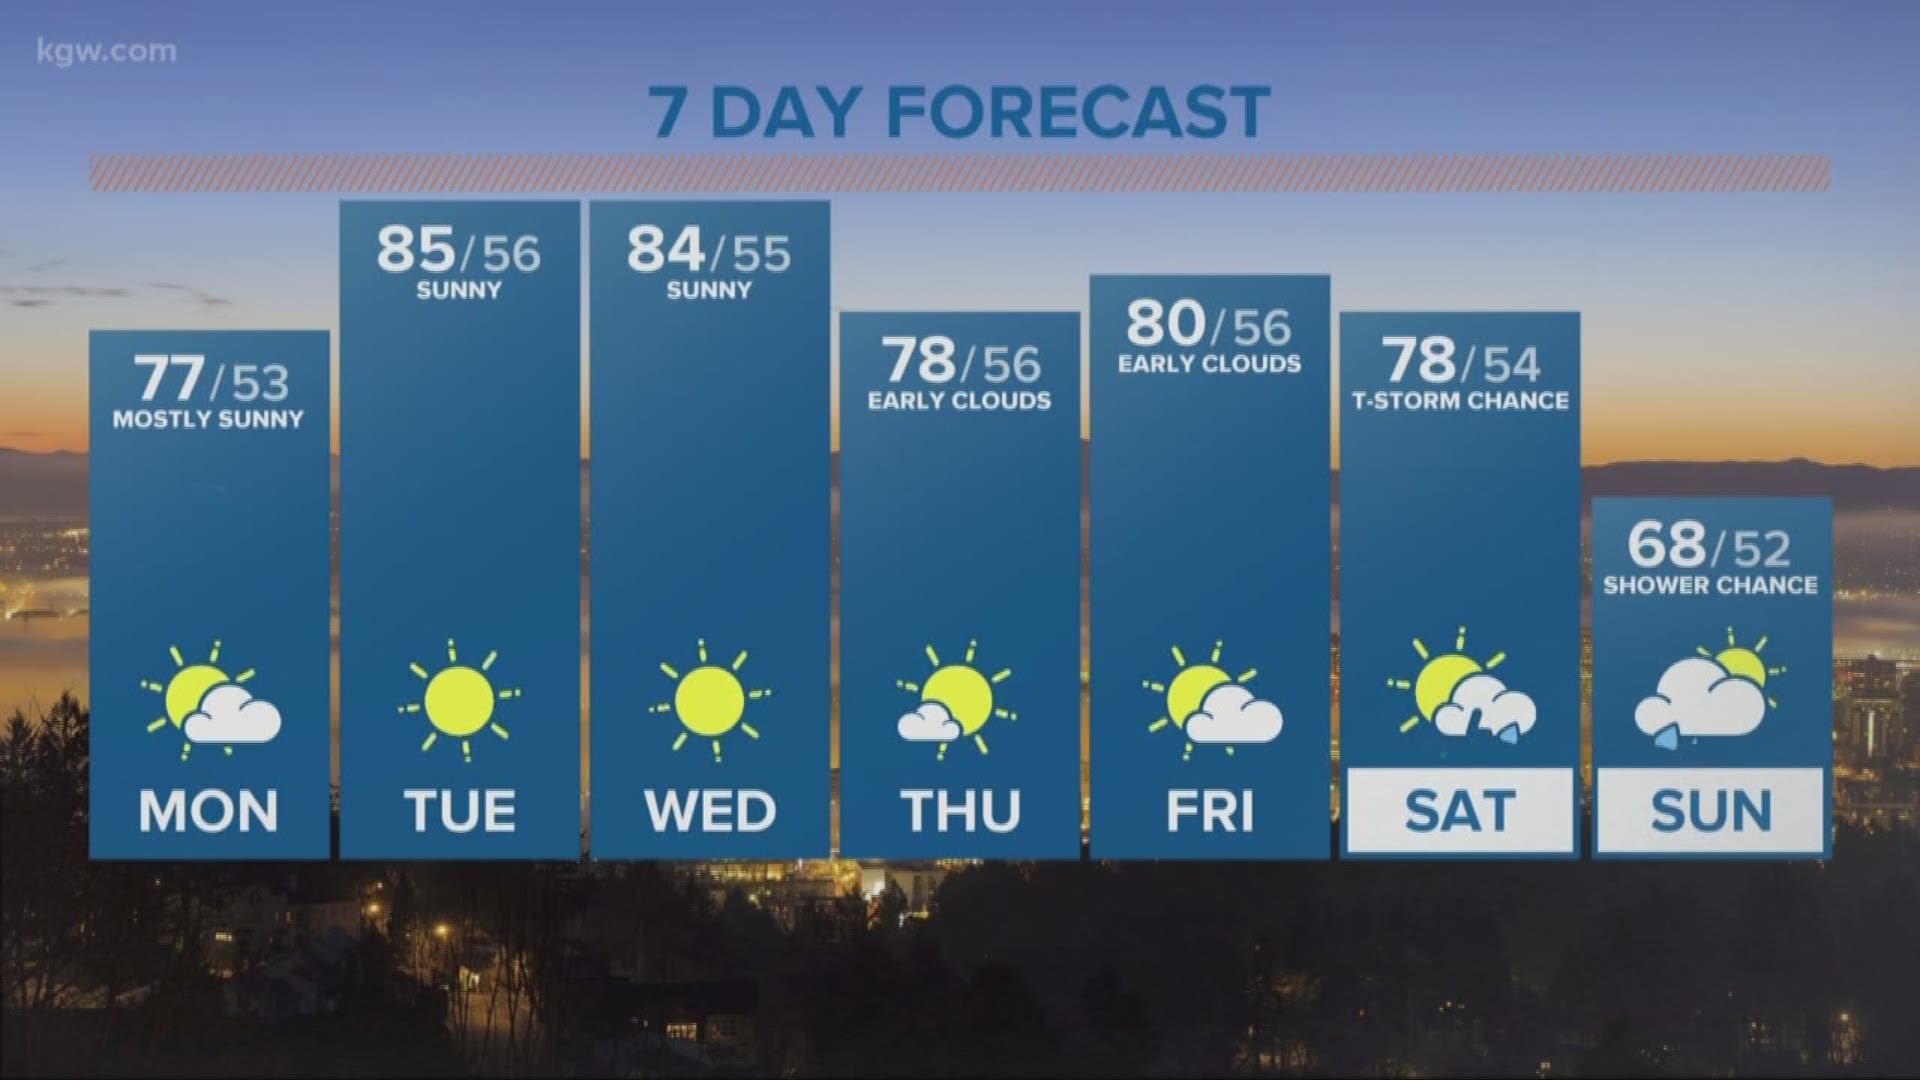 KGW Noon forecast 5-21-18